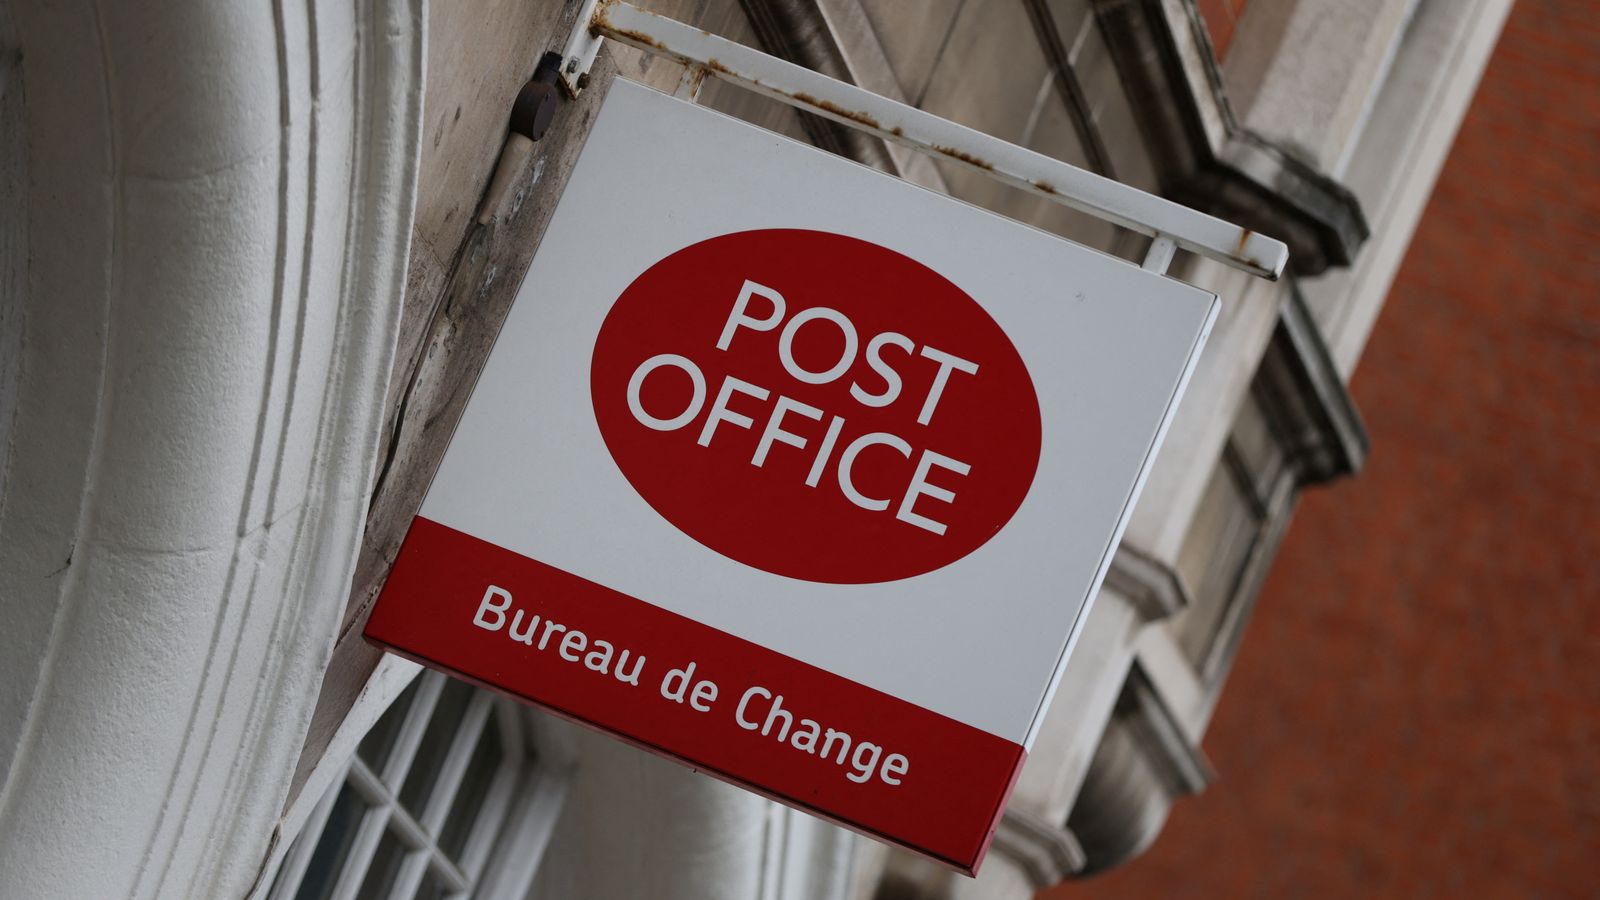 'Need for new leadership' at Post Office as chairman Henry Staunton ousted, Business Secretary Kemi Badenoch says